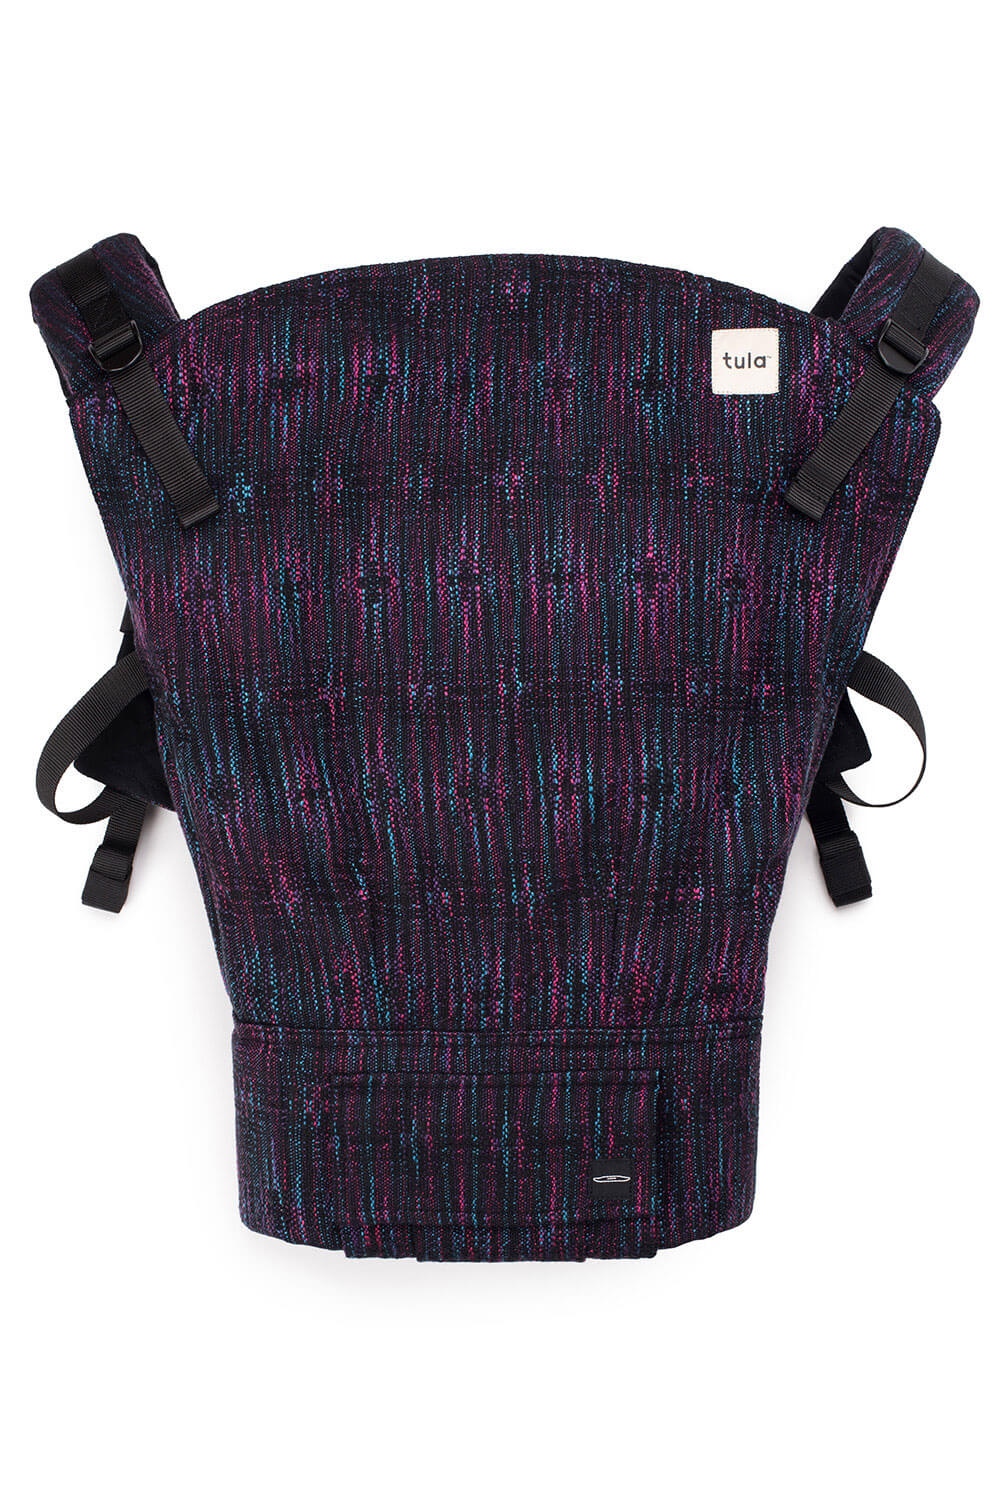 Pluto - Signature Woven Toddler Carrier